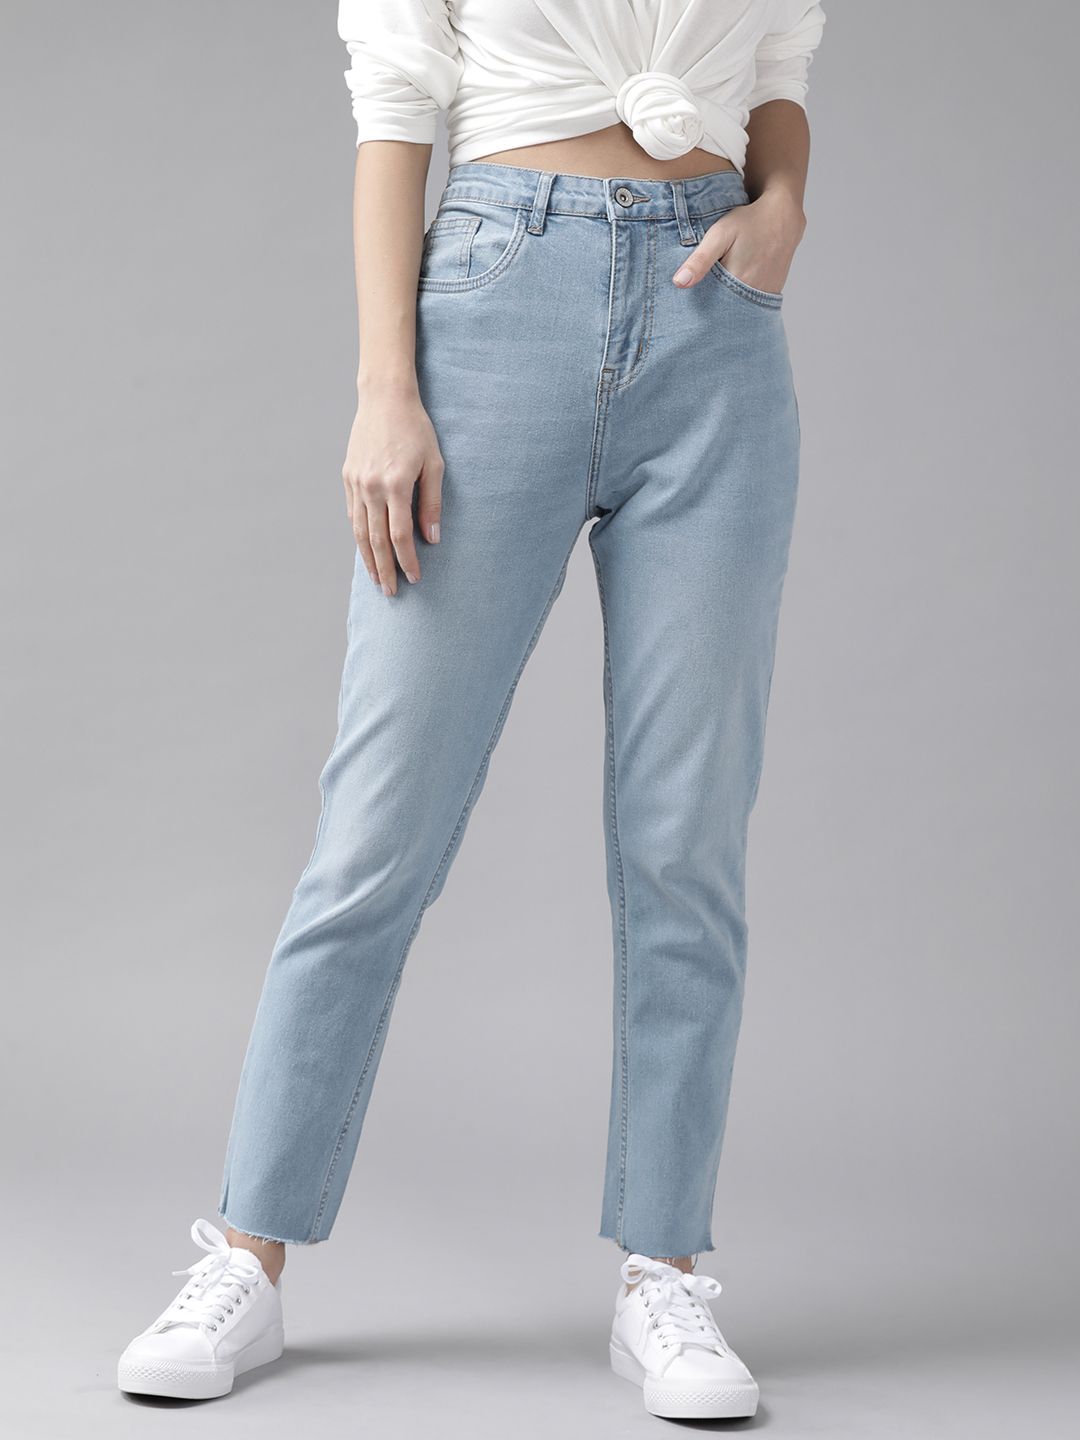 The Roadster Lifestyle Co Women Blue Stretchable Jeans Price in India